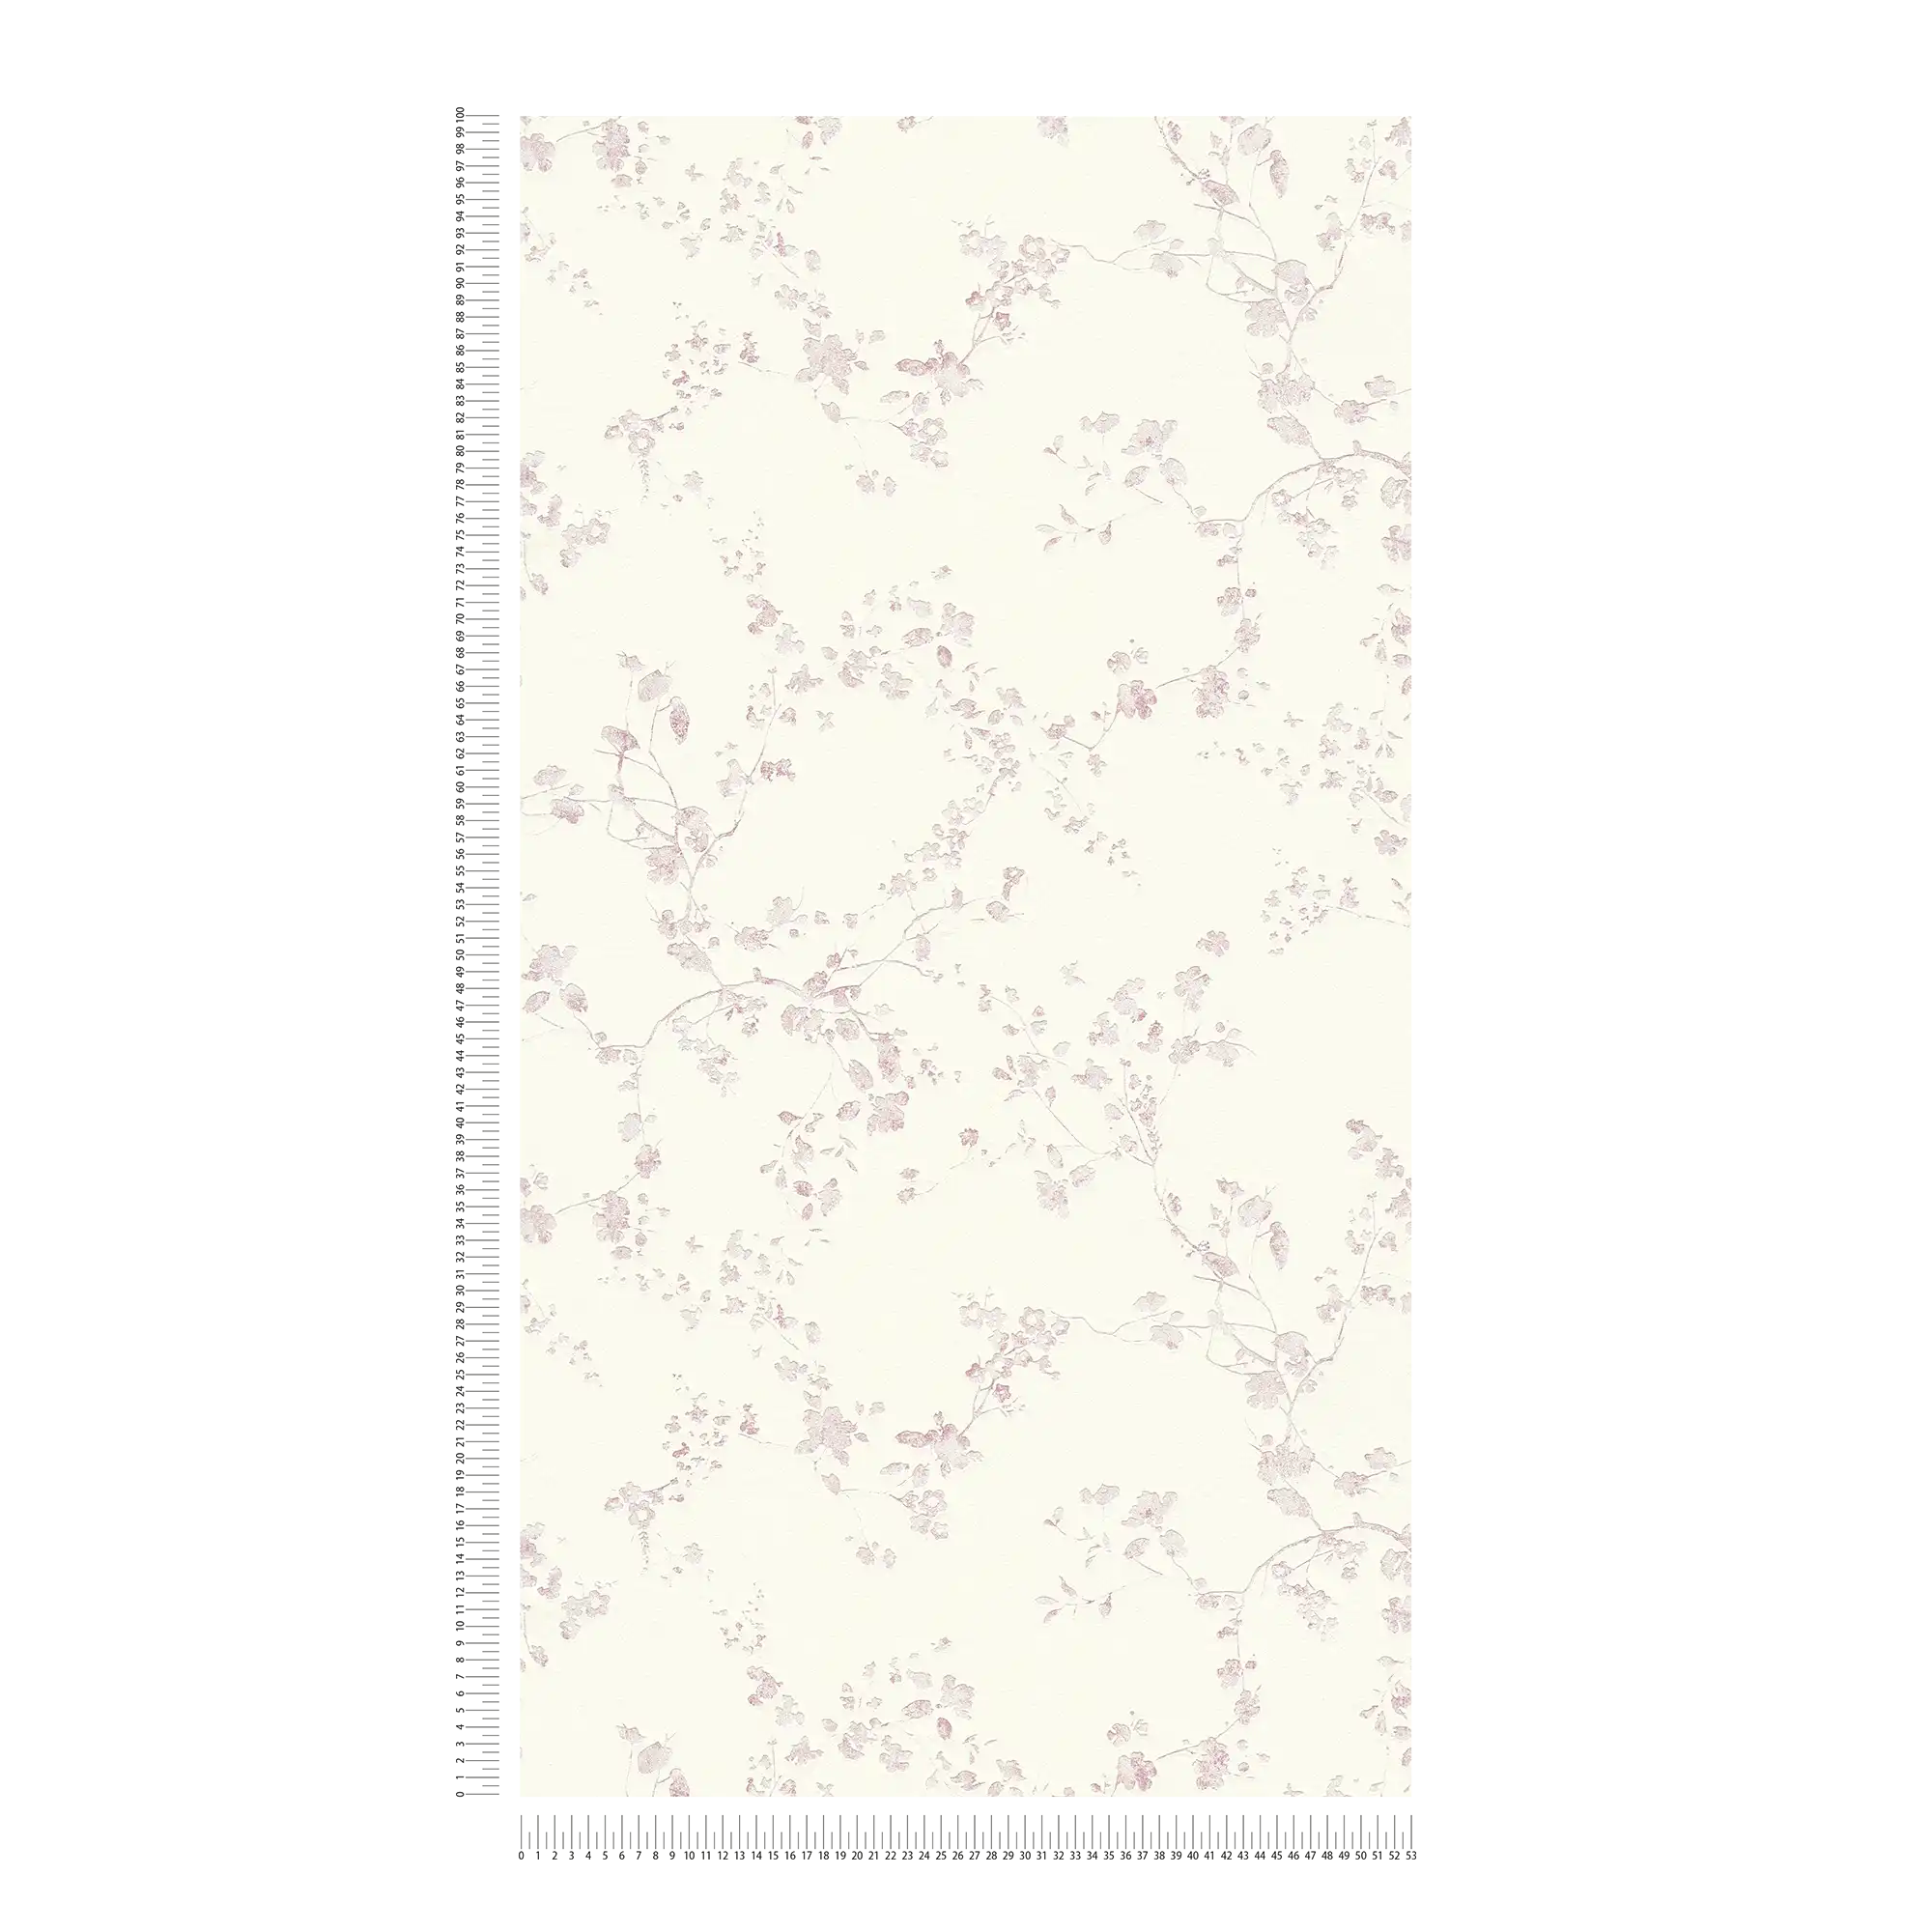             Flowers non-woven wallpaper in country style - purple, cream
        